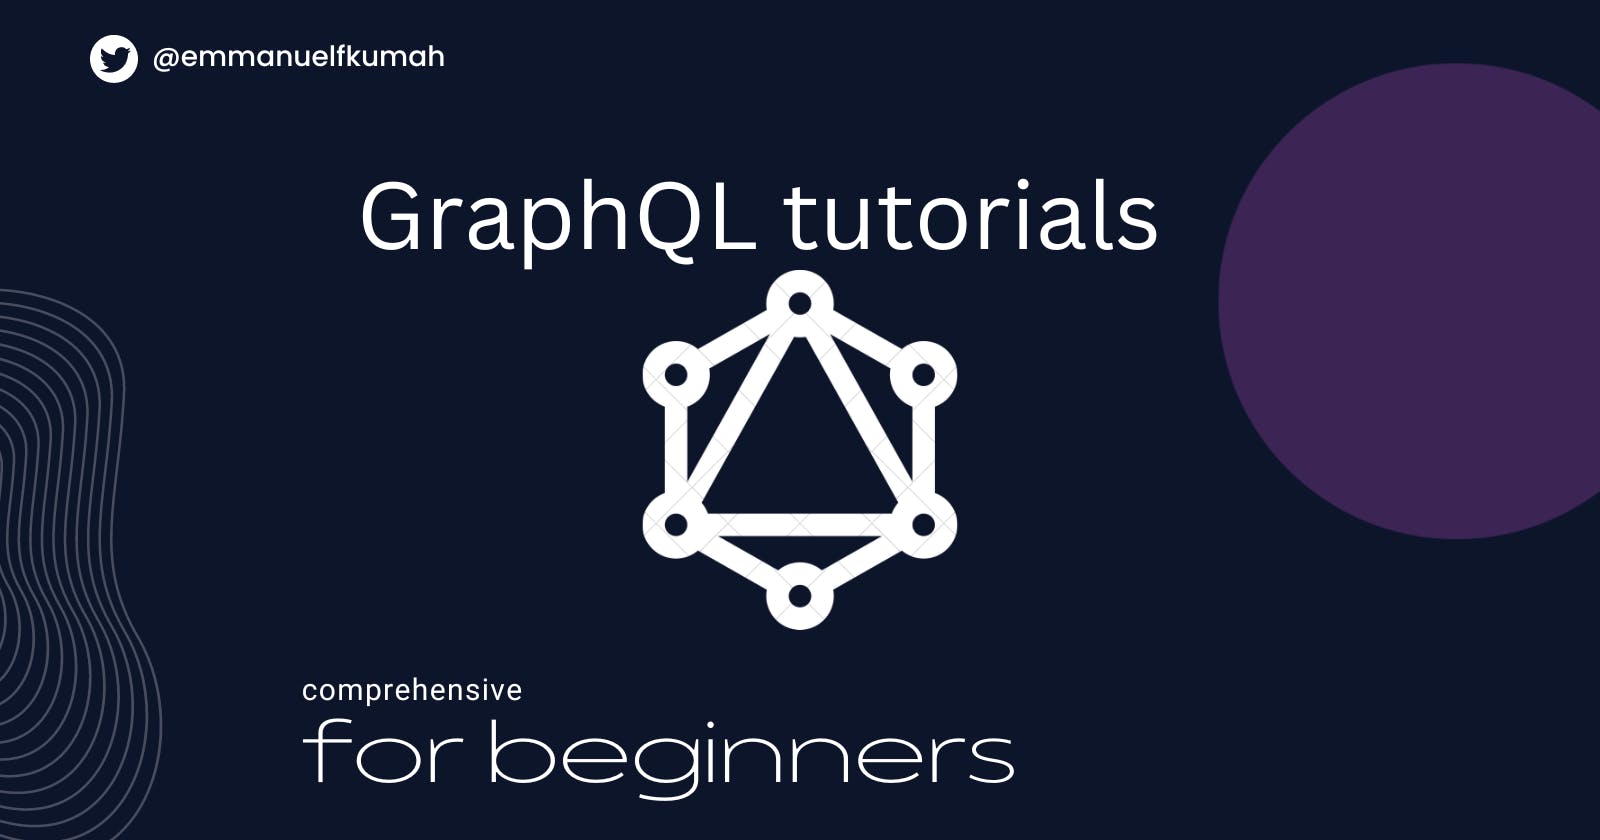 A comprehensive introduction to GraphQL: for efficient data queries and mutations